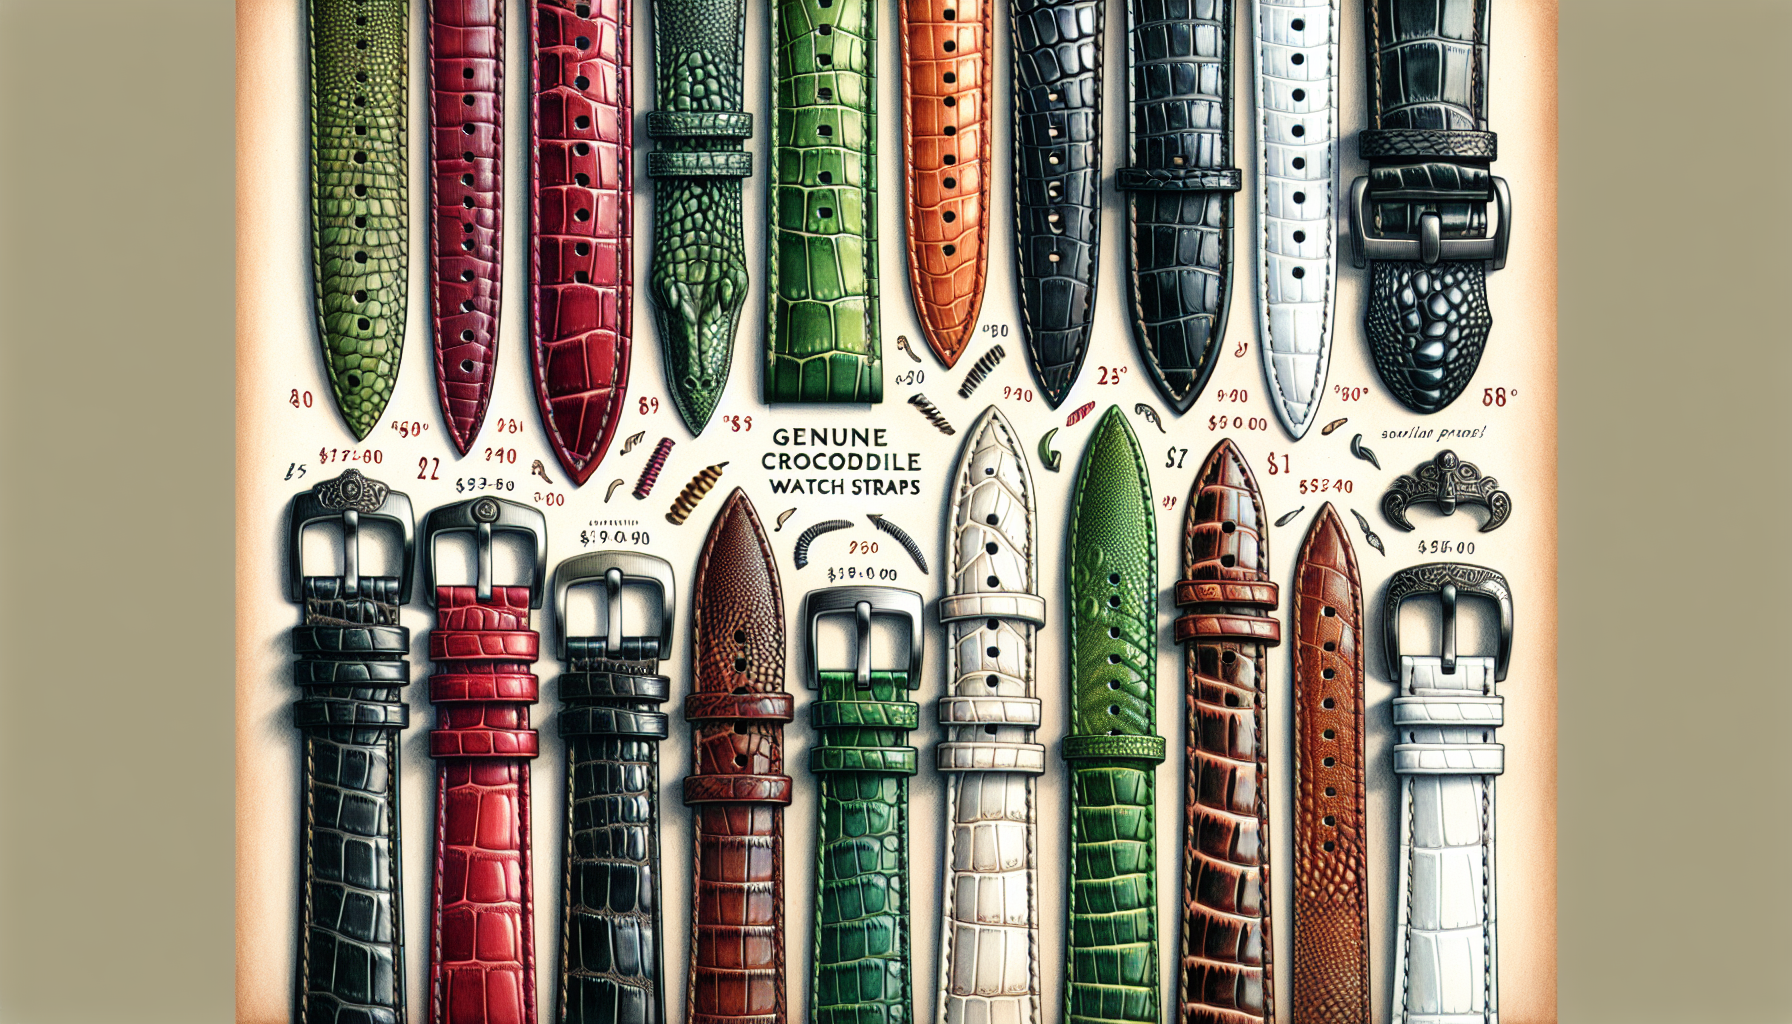 Illustration of colorful collection of crocodile watch straps